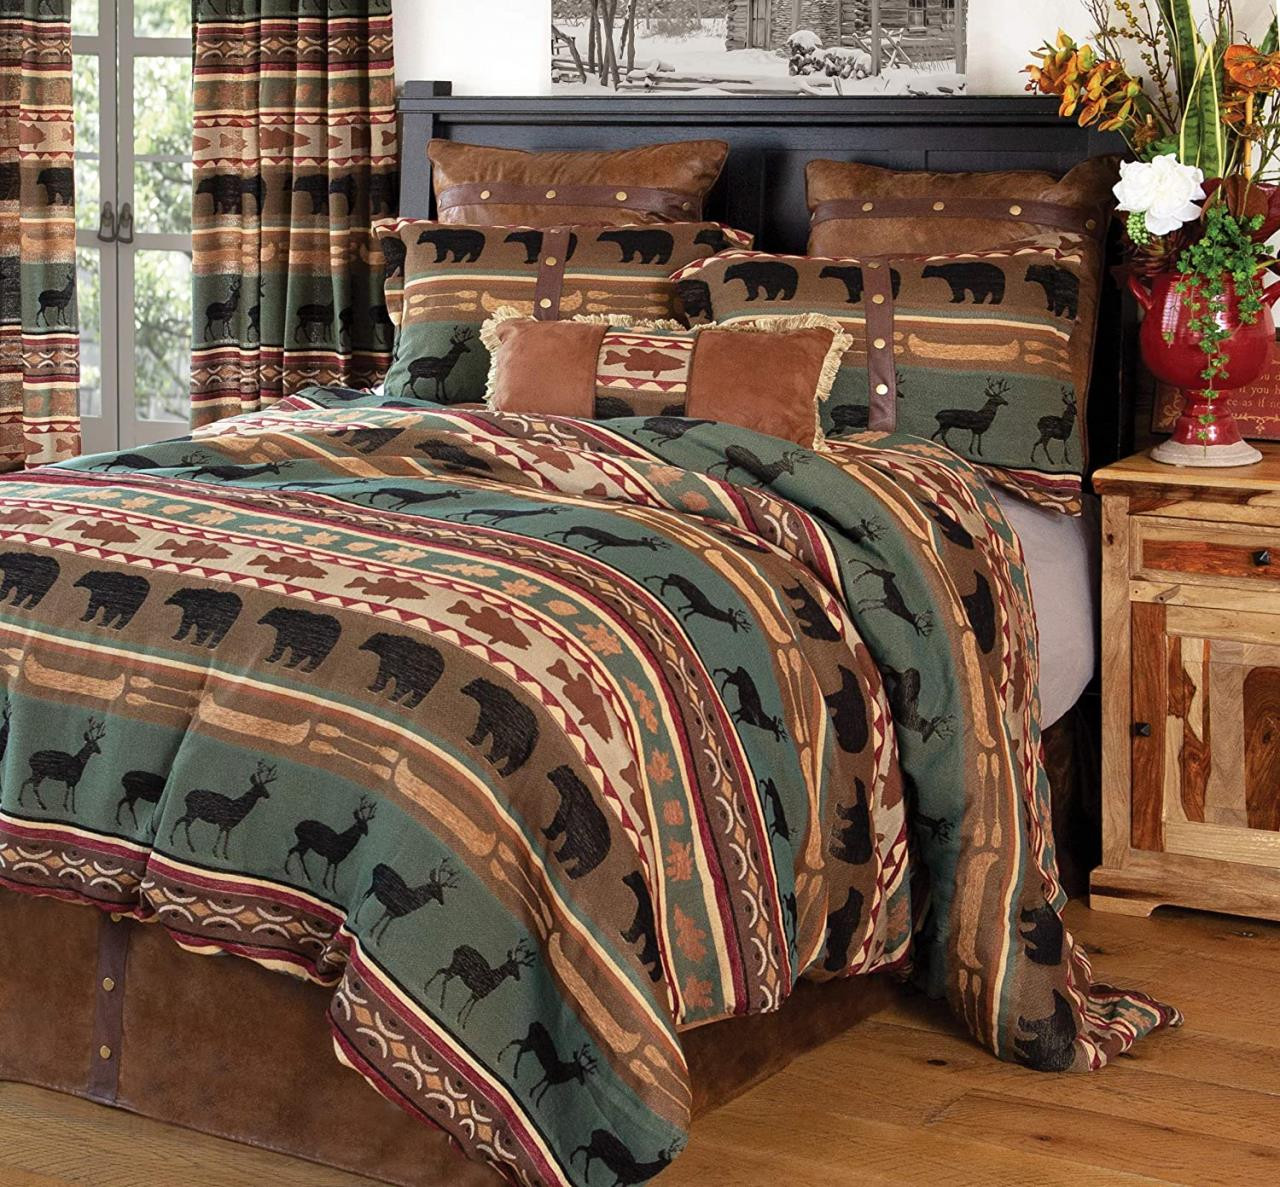 Skagit River Rustic Cabin Comforter Collection -